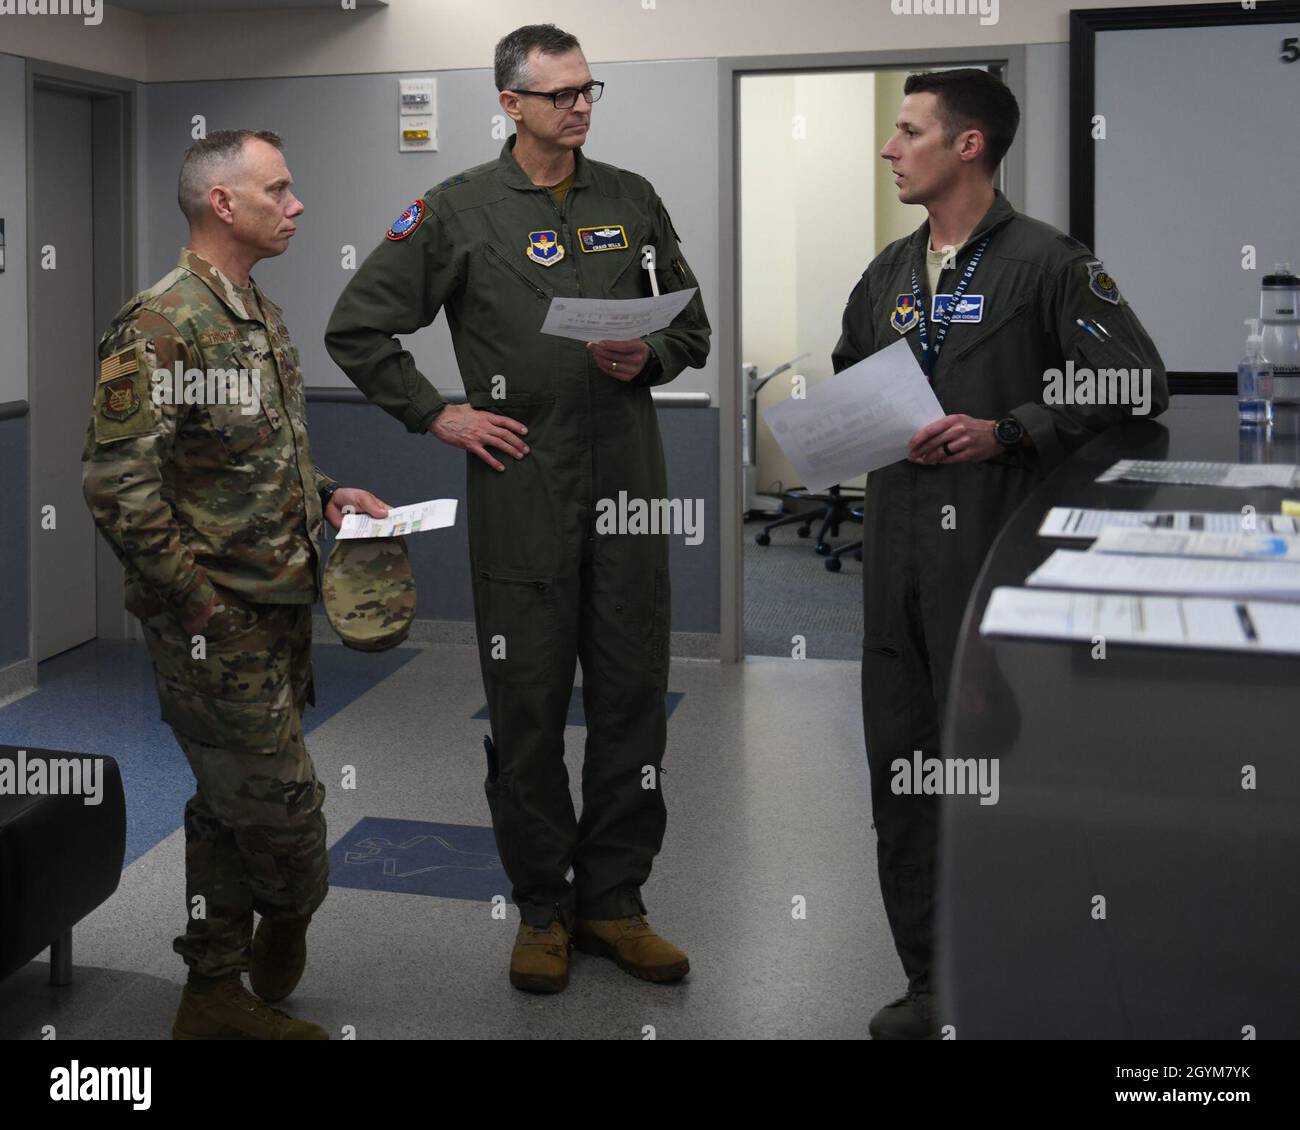 https://c8.alamy.com/comp/2GYM7YK/us-air-force-lt-col-david-cochran-right-58th-fighter-squadron-commander-briefs-us-air-force-maj-gen-craig-wills-middle-19th-air-force-commander-and-chief-master-sgt-erik-thompson-left-19th-air-force-command-chief-on-training-mission-productivity-during-an-immersion-tour-at-the-58th-fs-at-eglin-air-force-base-florida-jan-28-2020-wills-took-command-of-the-19th-air-force-in-june-2019-us-air-force-photo-by-airman-1st-class-amber-litteral-2GYM7YK.jpg